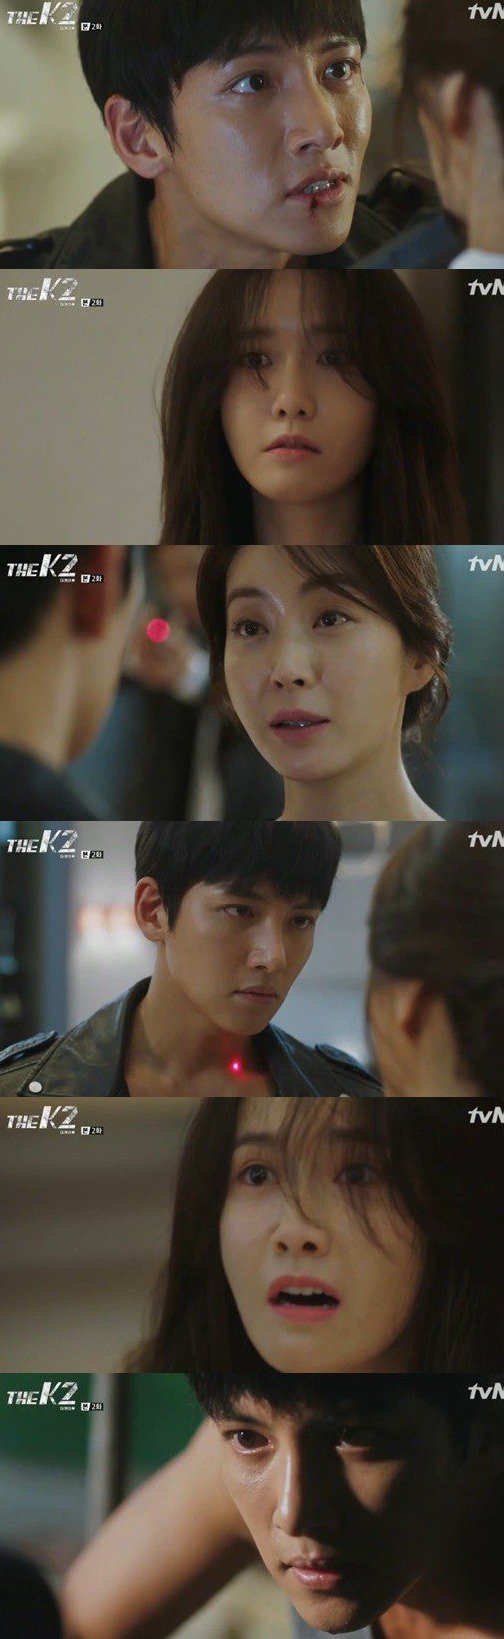 episodes 1 and 2 captures for the Korean drama 'The K2'